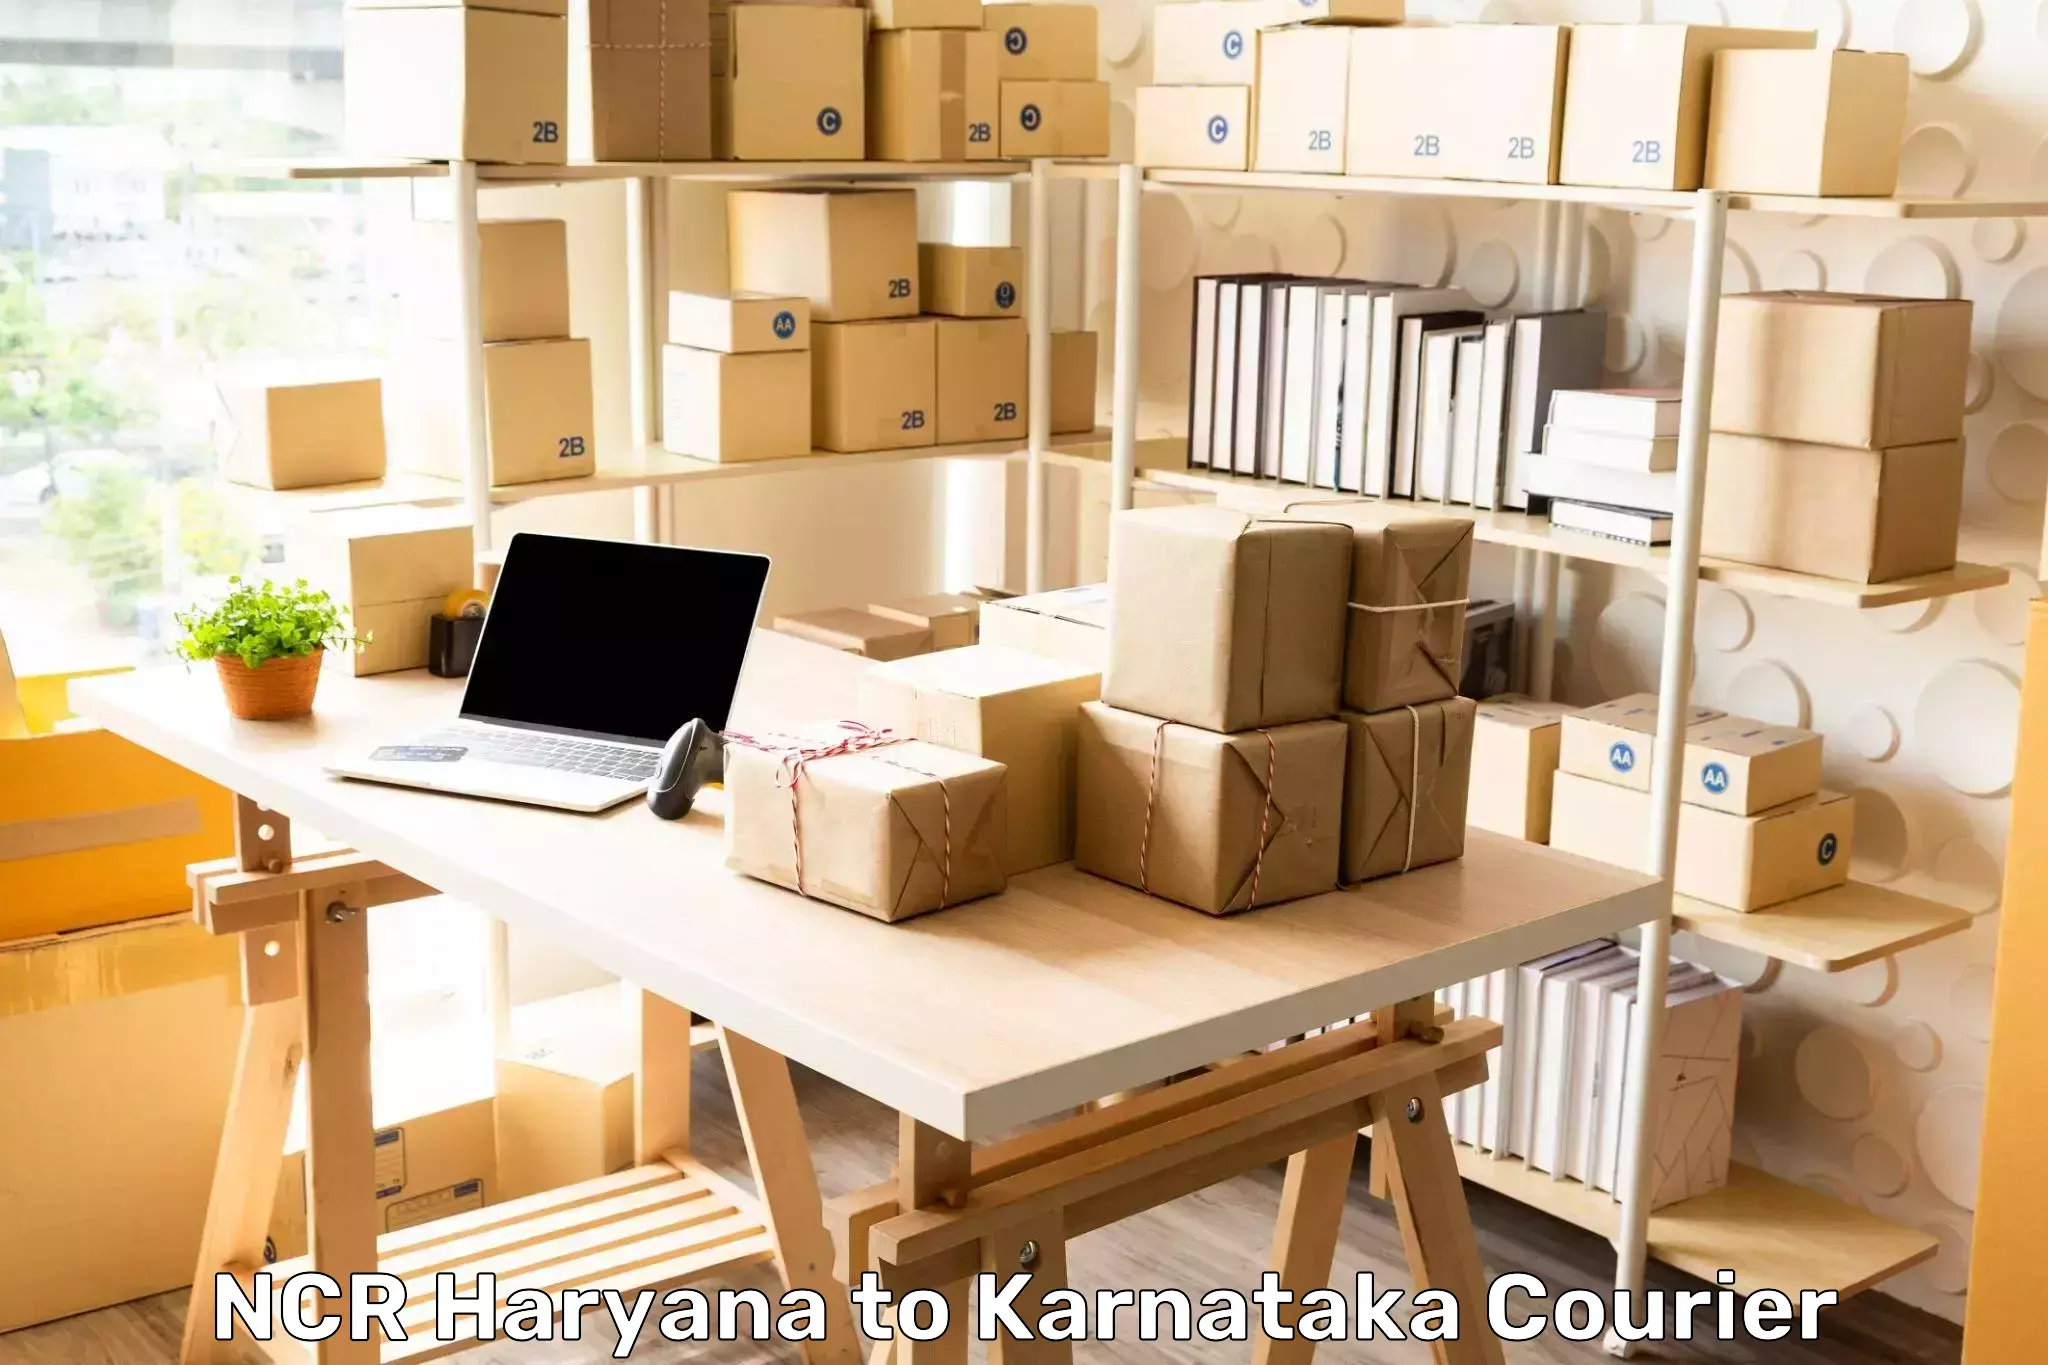 Large package courier NCR Haryana to Siruguppa